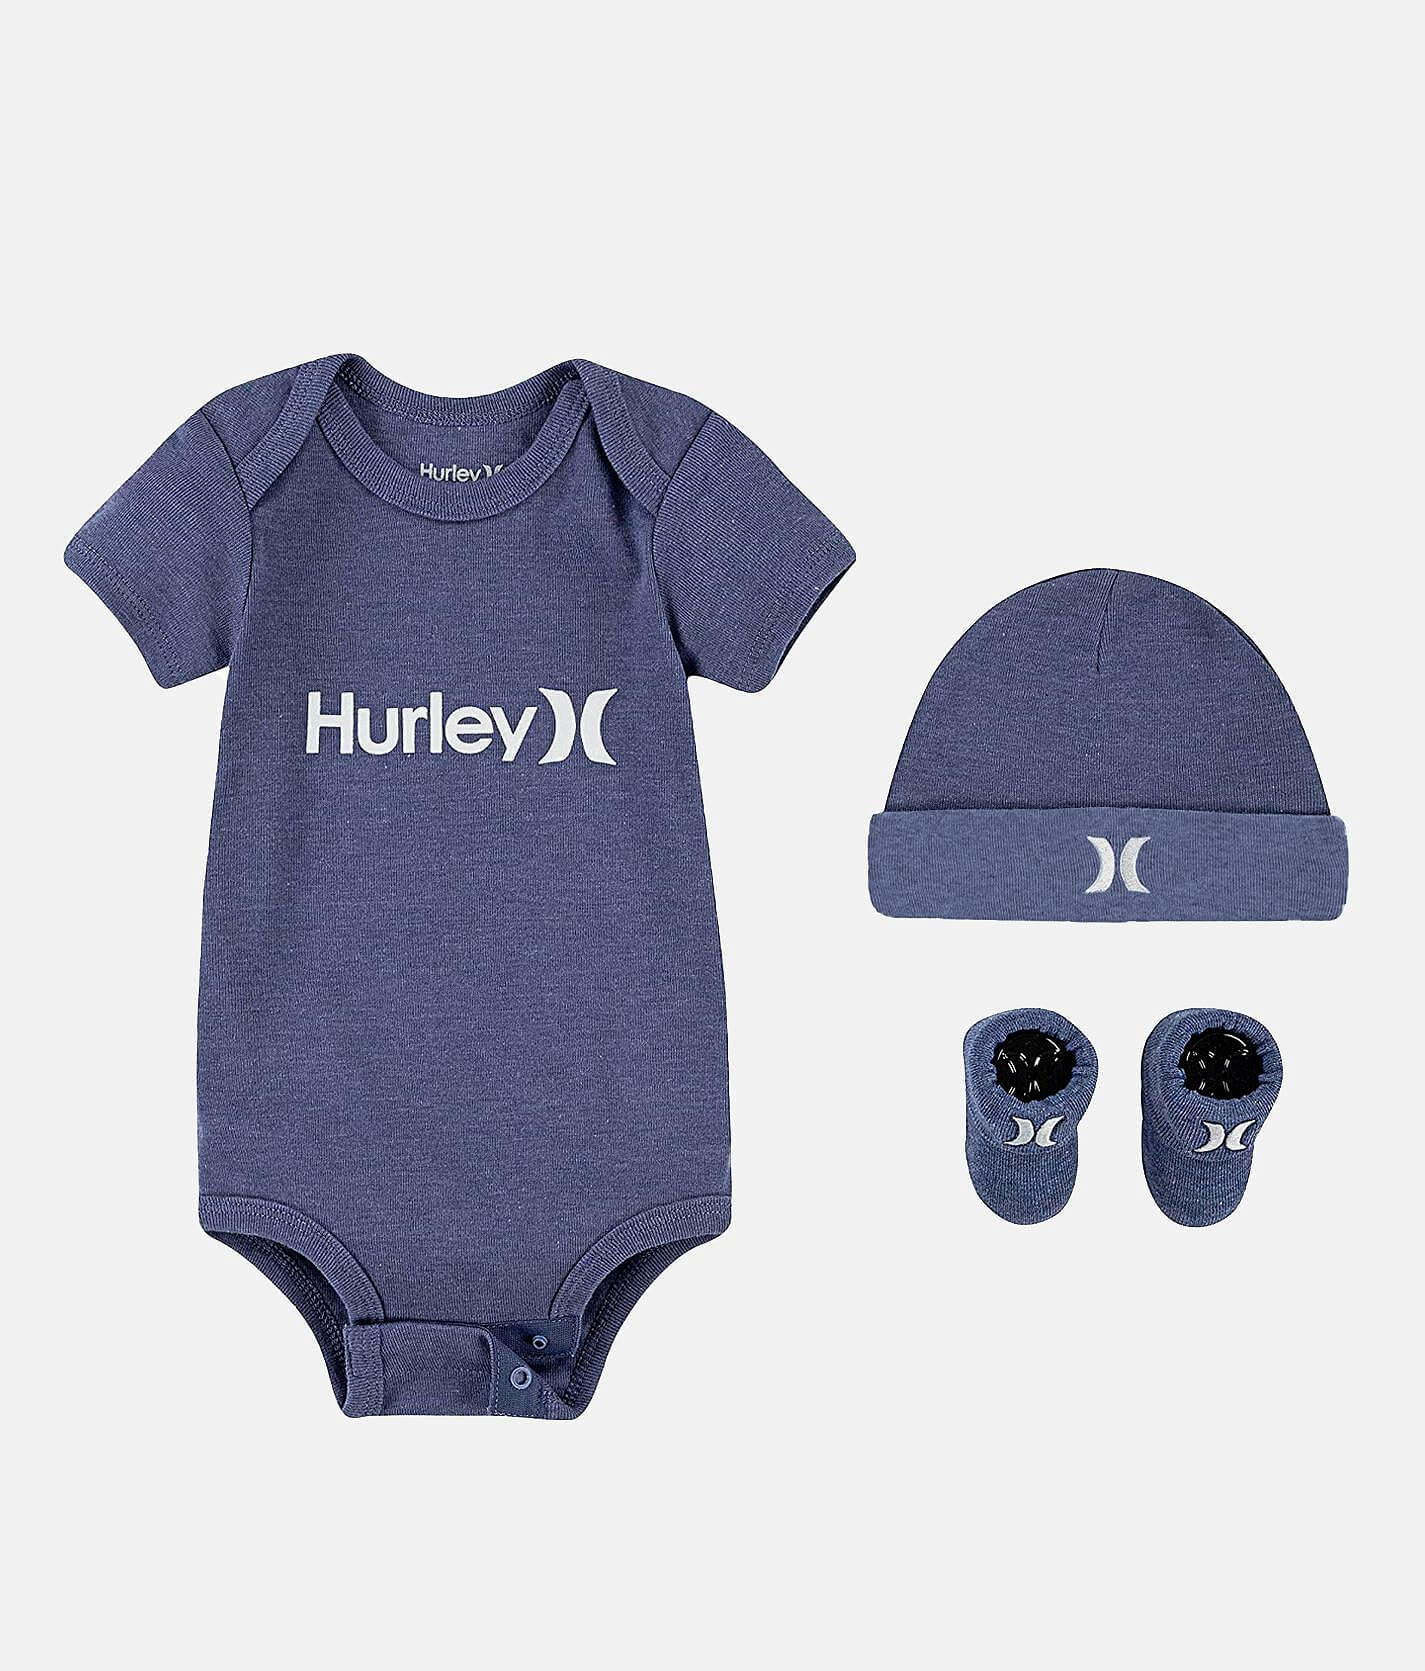 Baby - Hurley One \u0026 Only 6-12 Month 3 